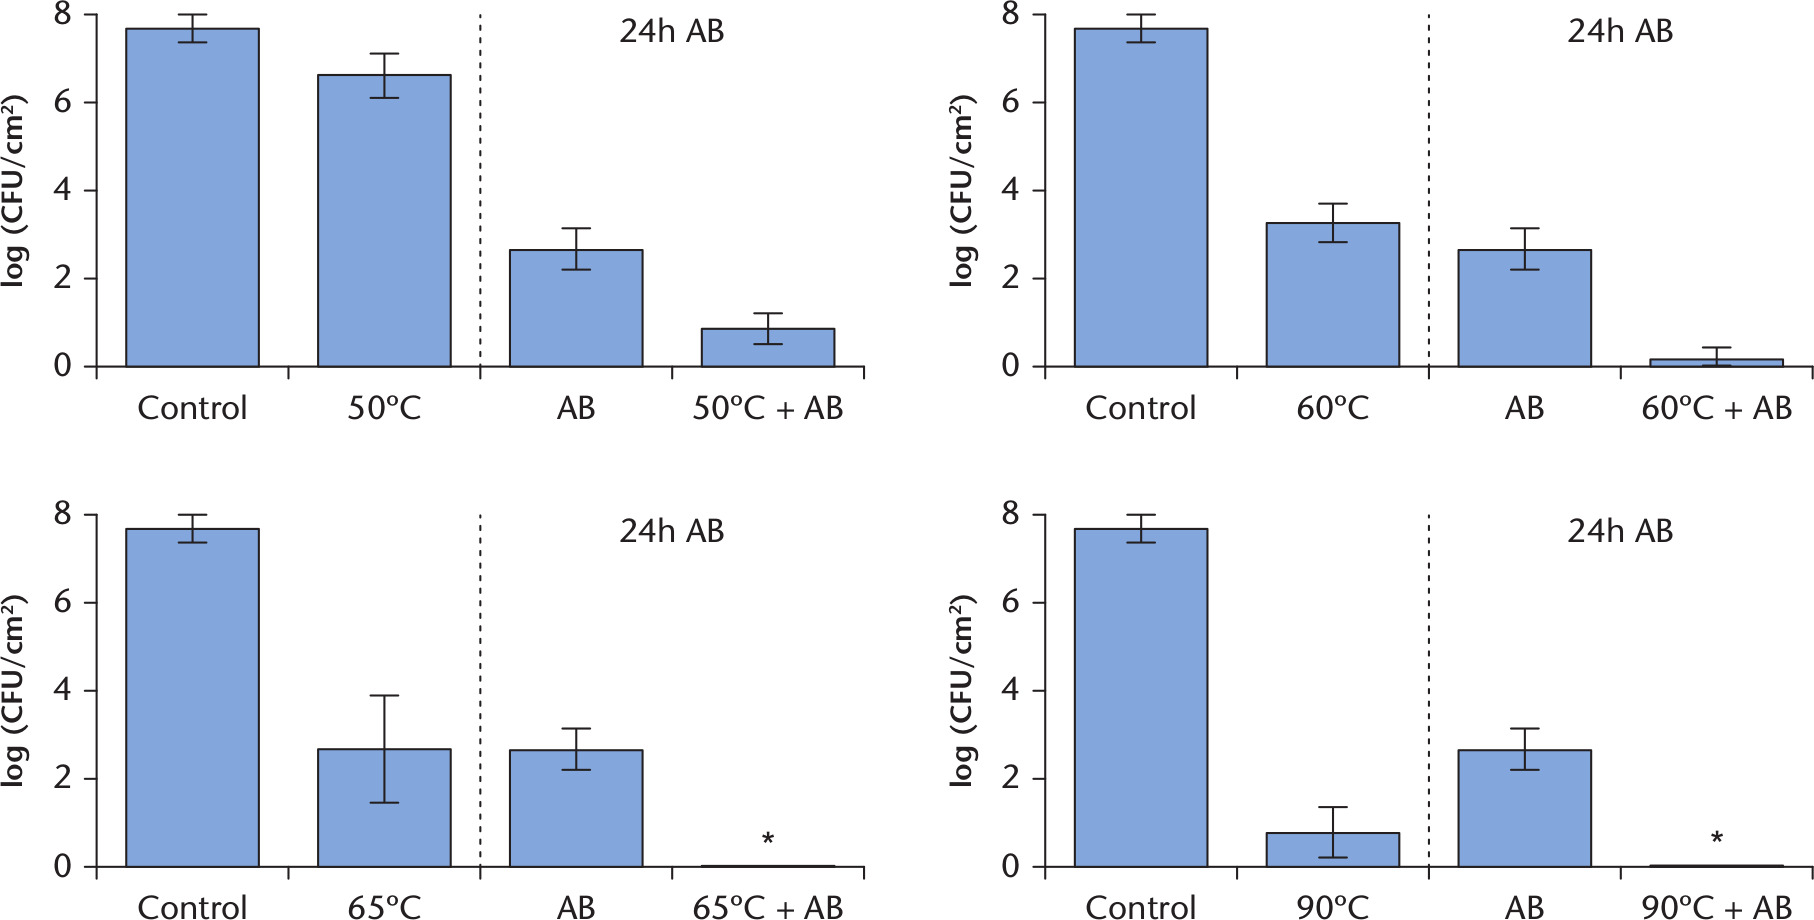 Fig. 3 
            Graphs showing log colony forming units (CFUs) per cm2 for 24 hour Staphylococcus epidermidis biofilms with (24h AB) and without antibiotics after thermal exposure. The bacteria were exposed to the target temperature for 3.5 minutes. Data are presented as means and corresponding 95% confidence intervals of at least five experiments per group. AB, vancomycin 20 mg/l and rifampicin 10 mg/l for 24 hours after thermal shock from induction heater. *Full eradication.
          